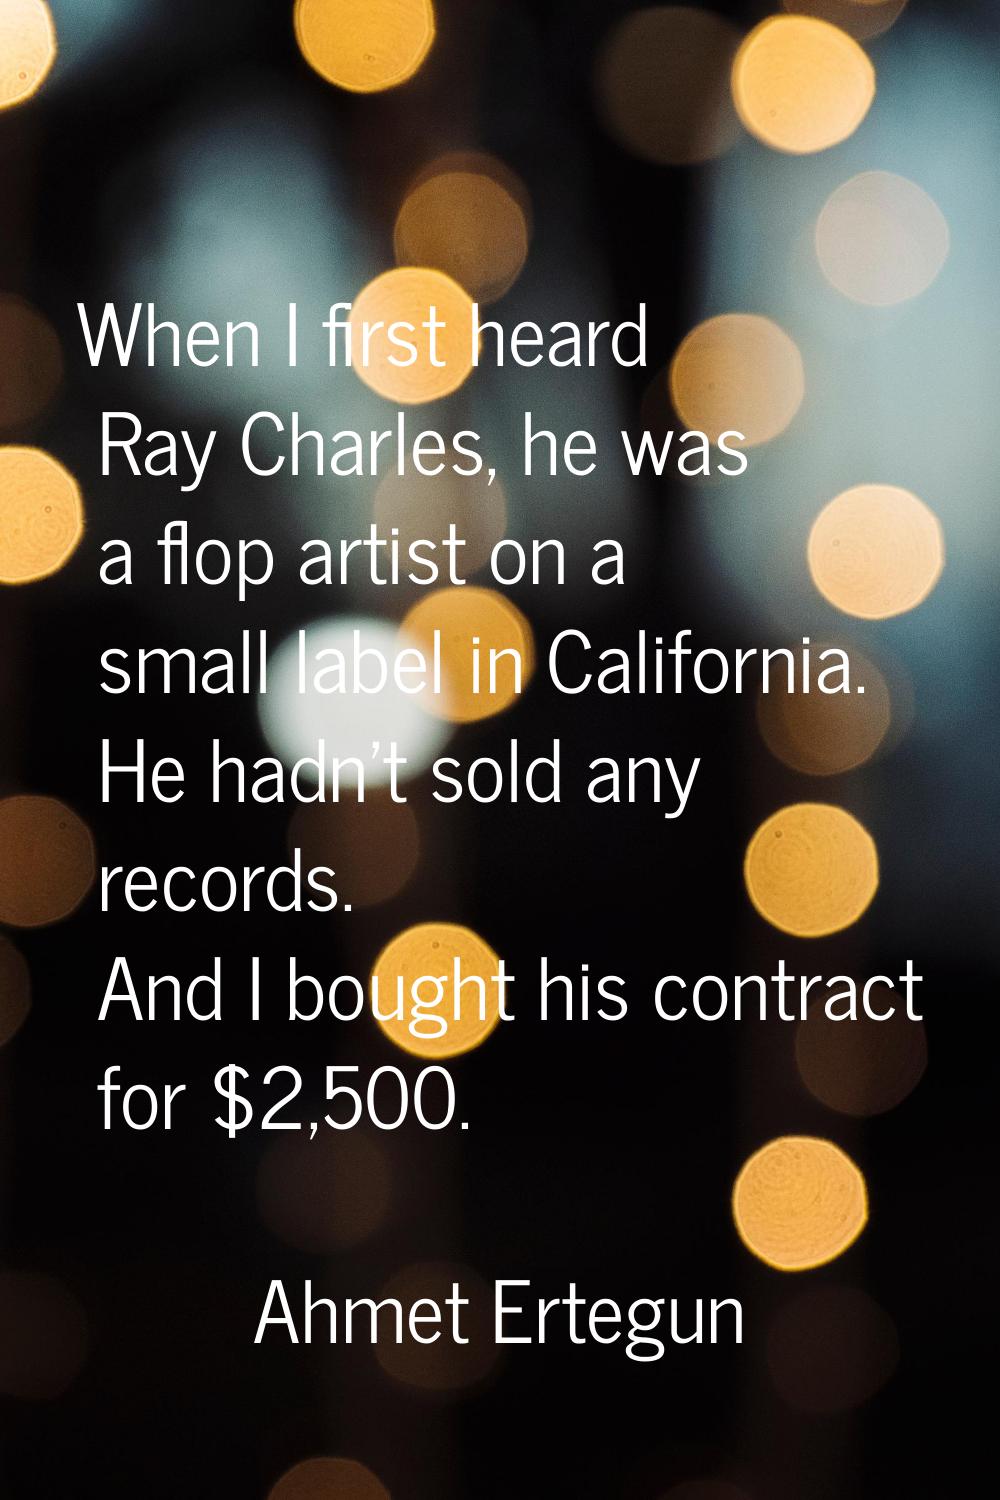 When I first heard Ray Charles, he was a flop artist on a small label in California. He hadn't sold